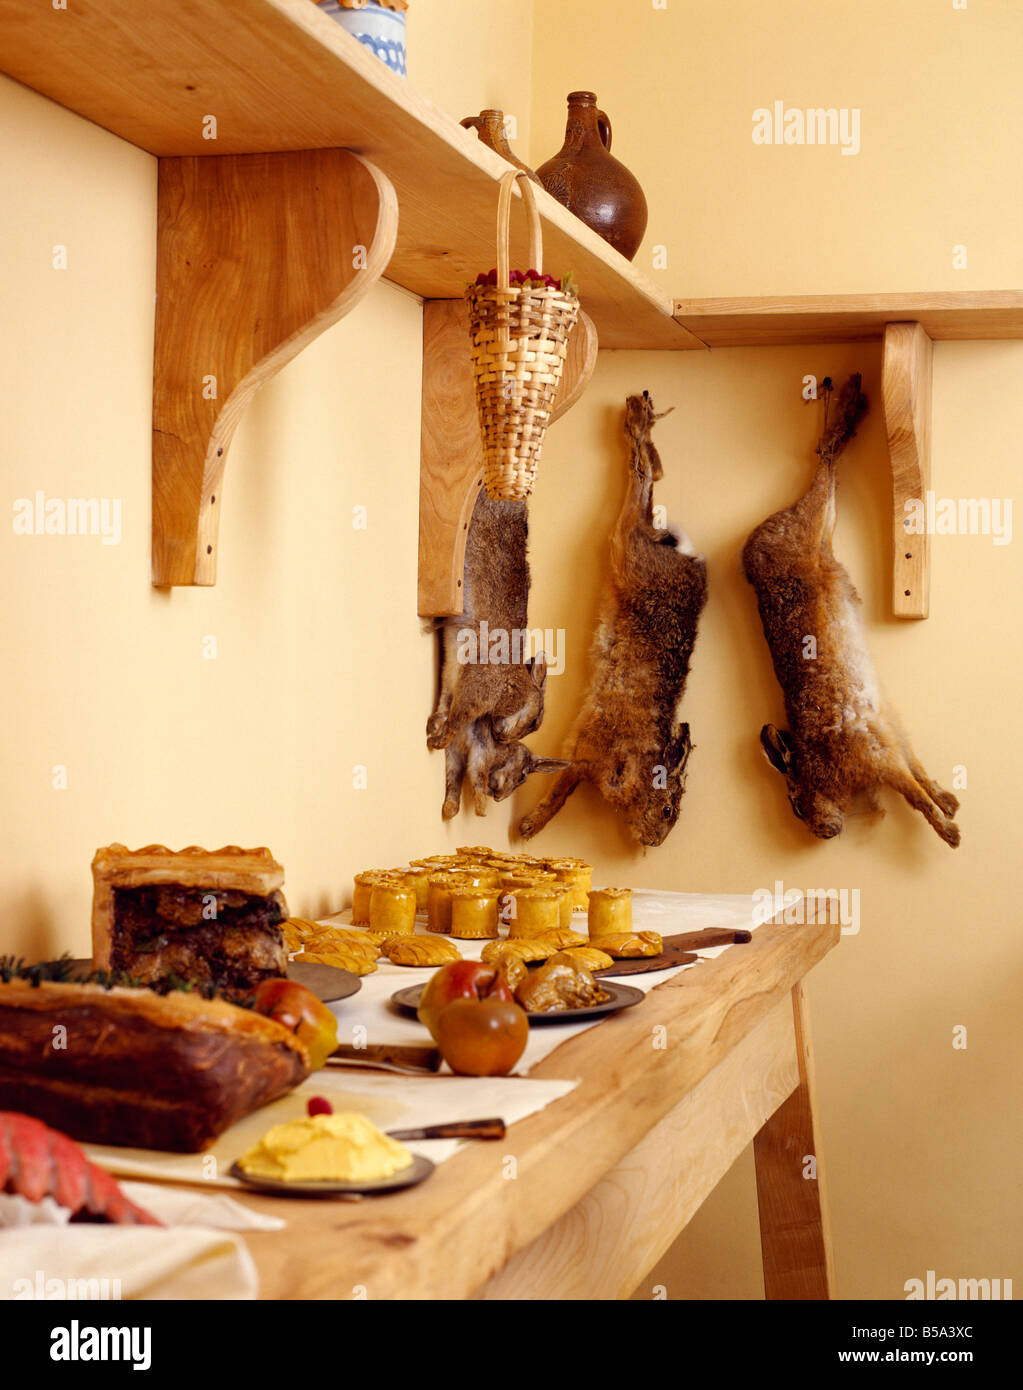 Wooden shelf with game rabbits above raised pies on wooden table in larder Stock Photo